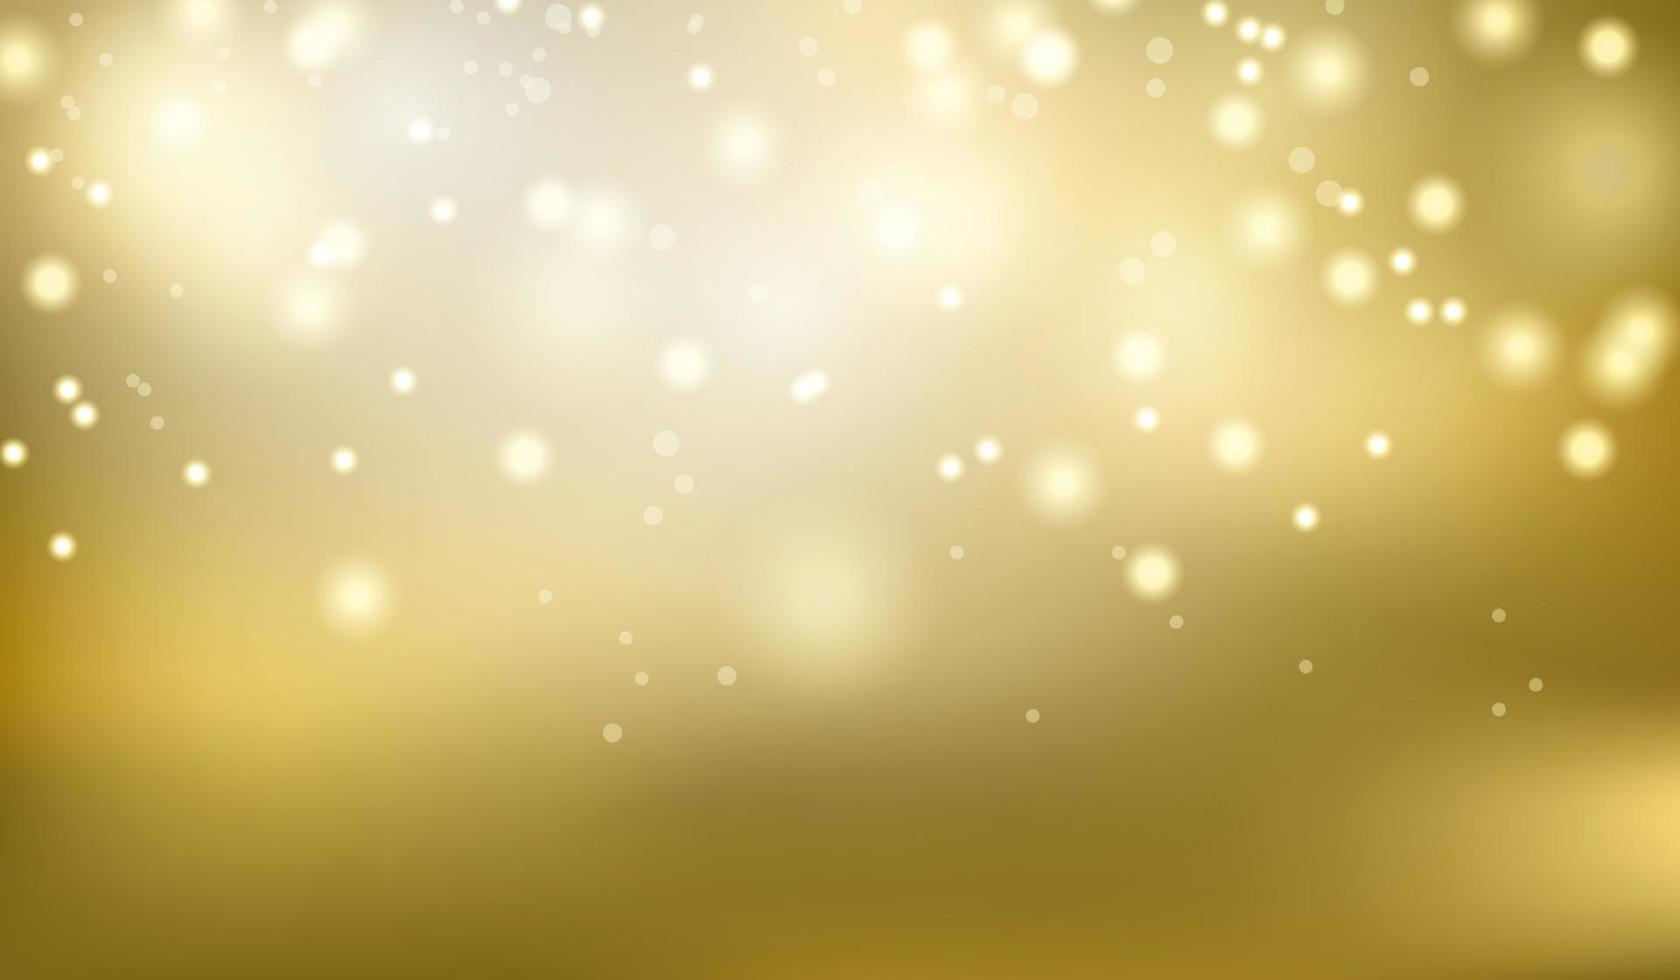 Gold glittering blur abstract background vector